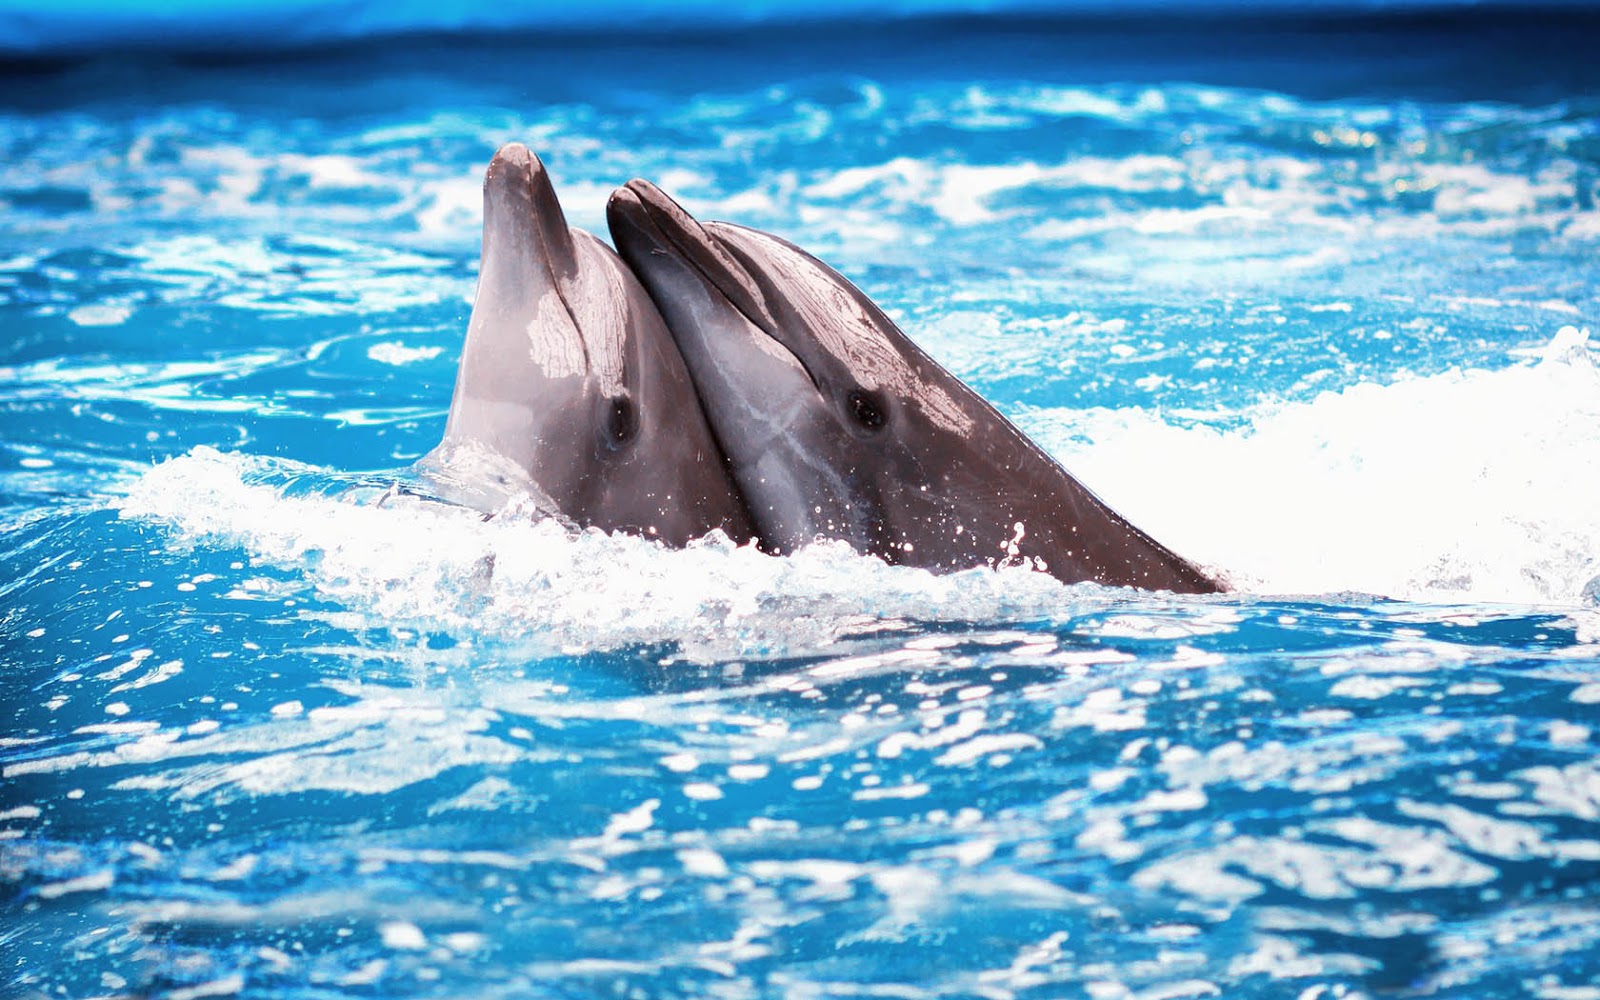 Dolphin Wallpaper With Two Dolphins In The Swimming Pool Jpg